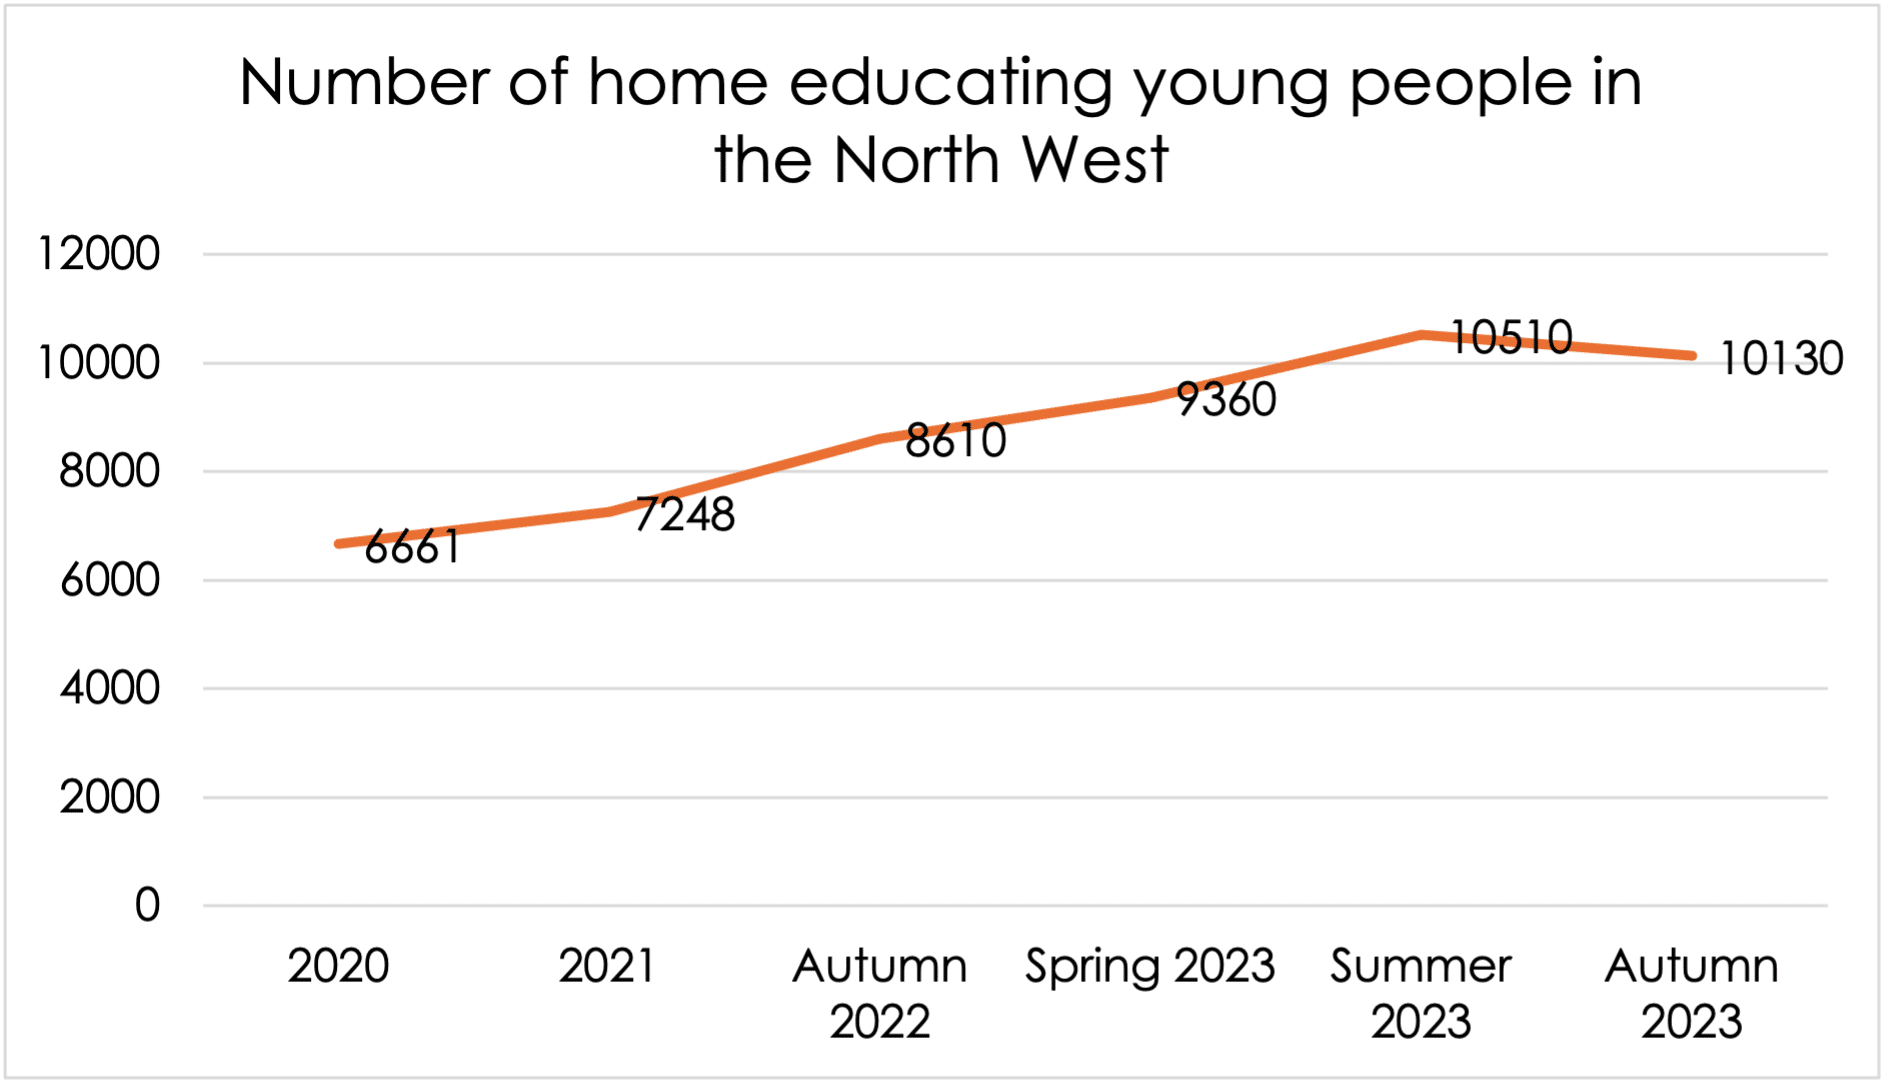 A chart showing the number of home educating young people in the North West from 2020 to Autumn 2023. The chart shows a steady rise from 6,661 in 2020 to 10,510 in Summer 2023, with a slight drop to 10,130 in Autumn 2023.